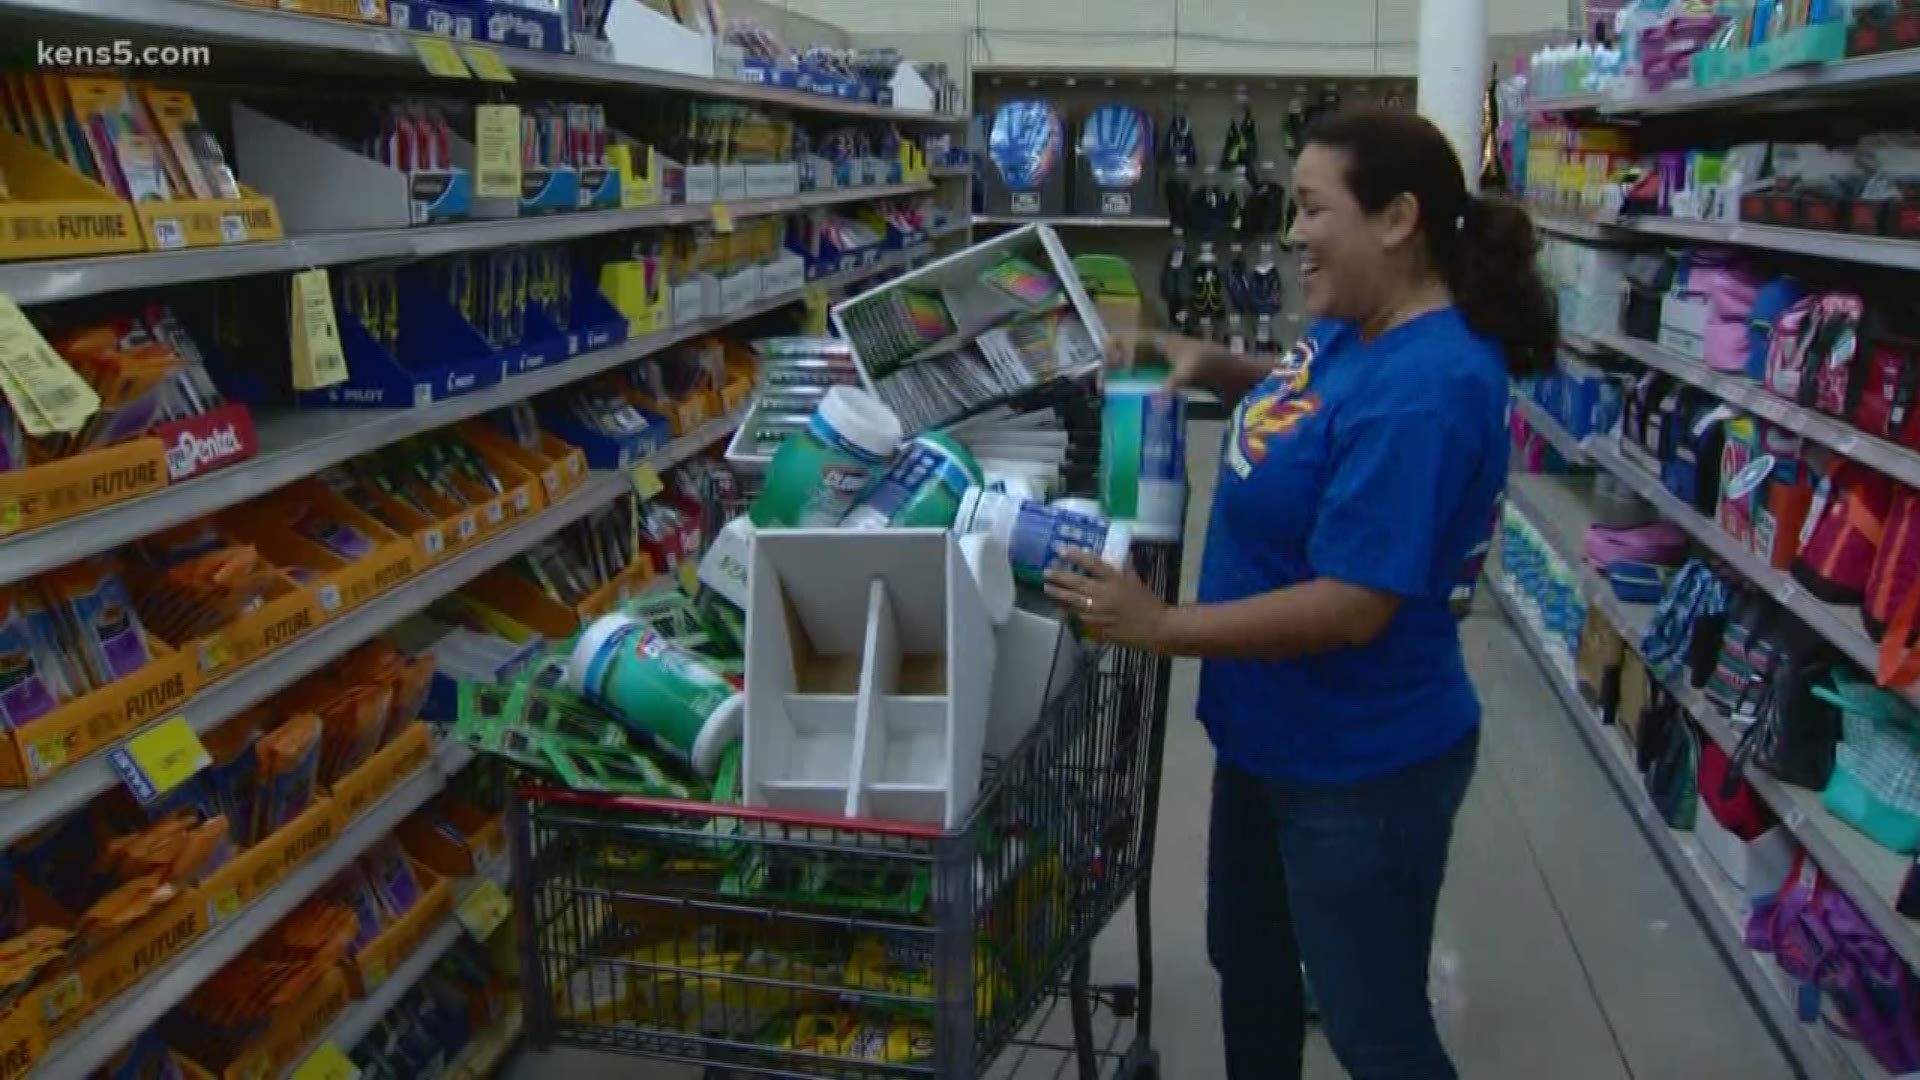 H-E-B allowed Mary Morales, who teaches at Big Country Elementary, 45 seconds to grab all the school supplies she could.